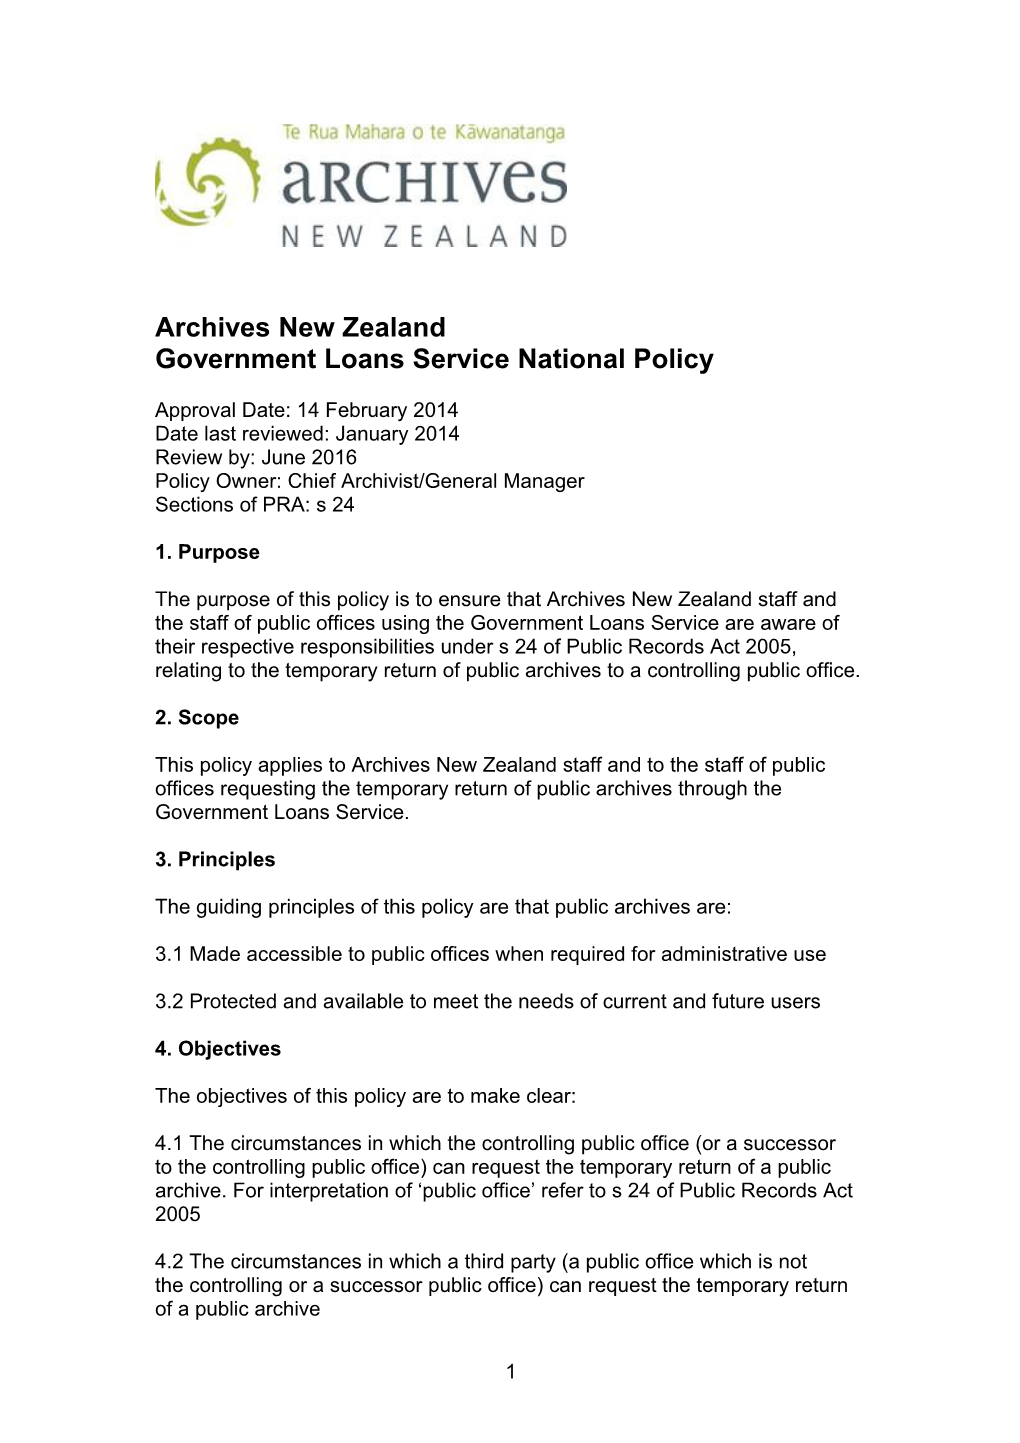 Government Loans Service National Policy